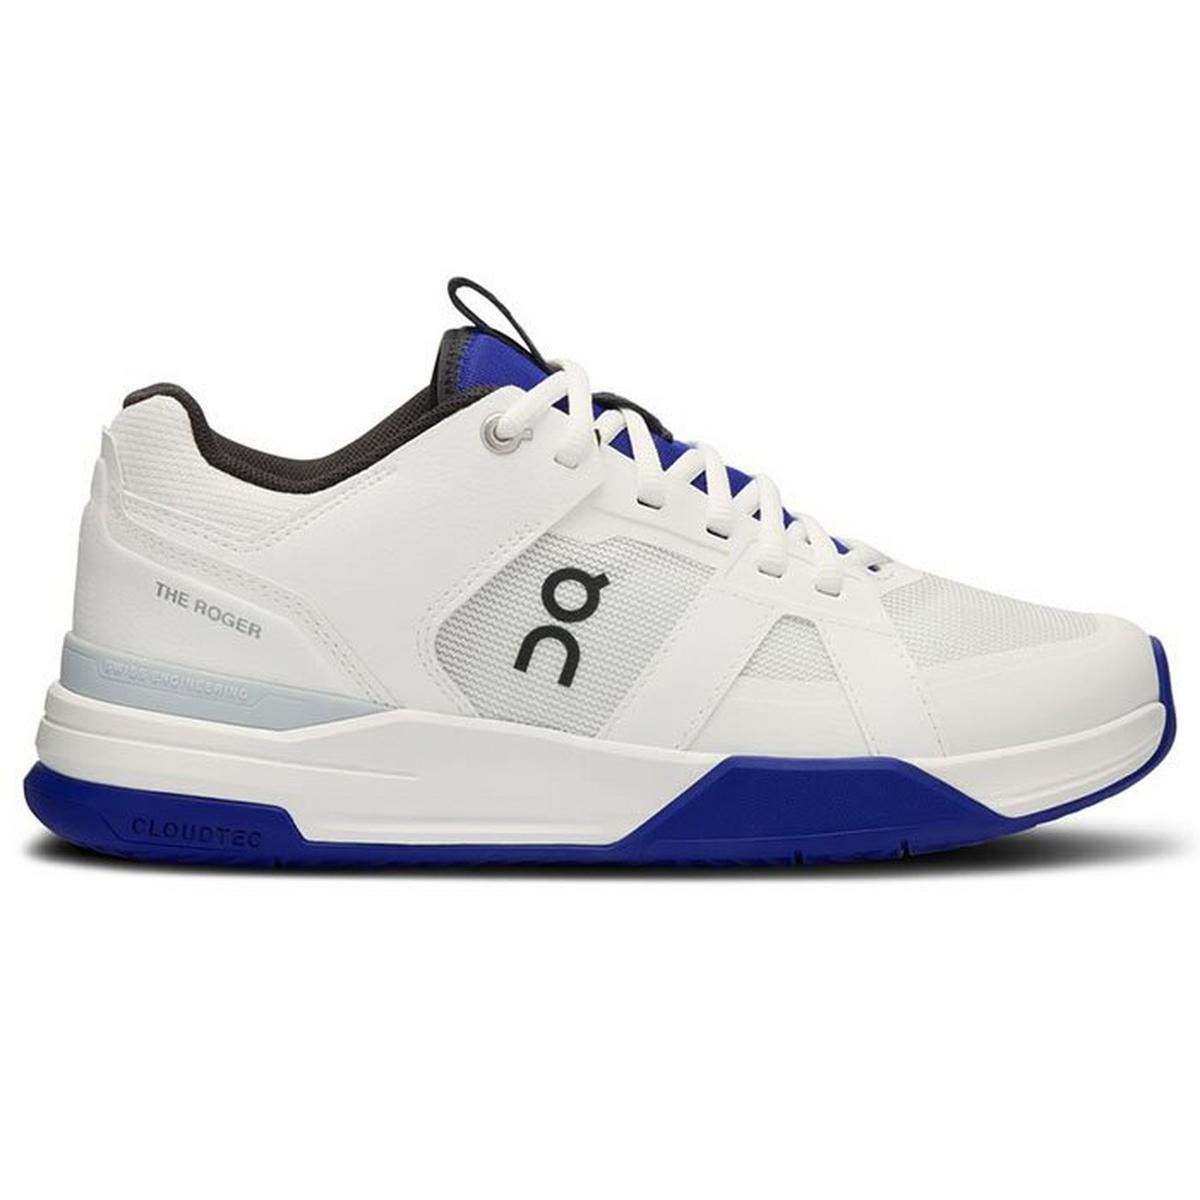 Women's The Roger Clubhouse Pro Tennis Shoe